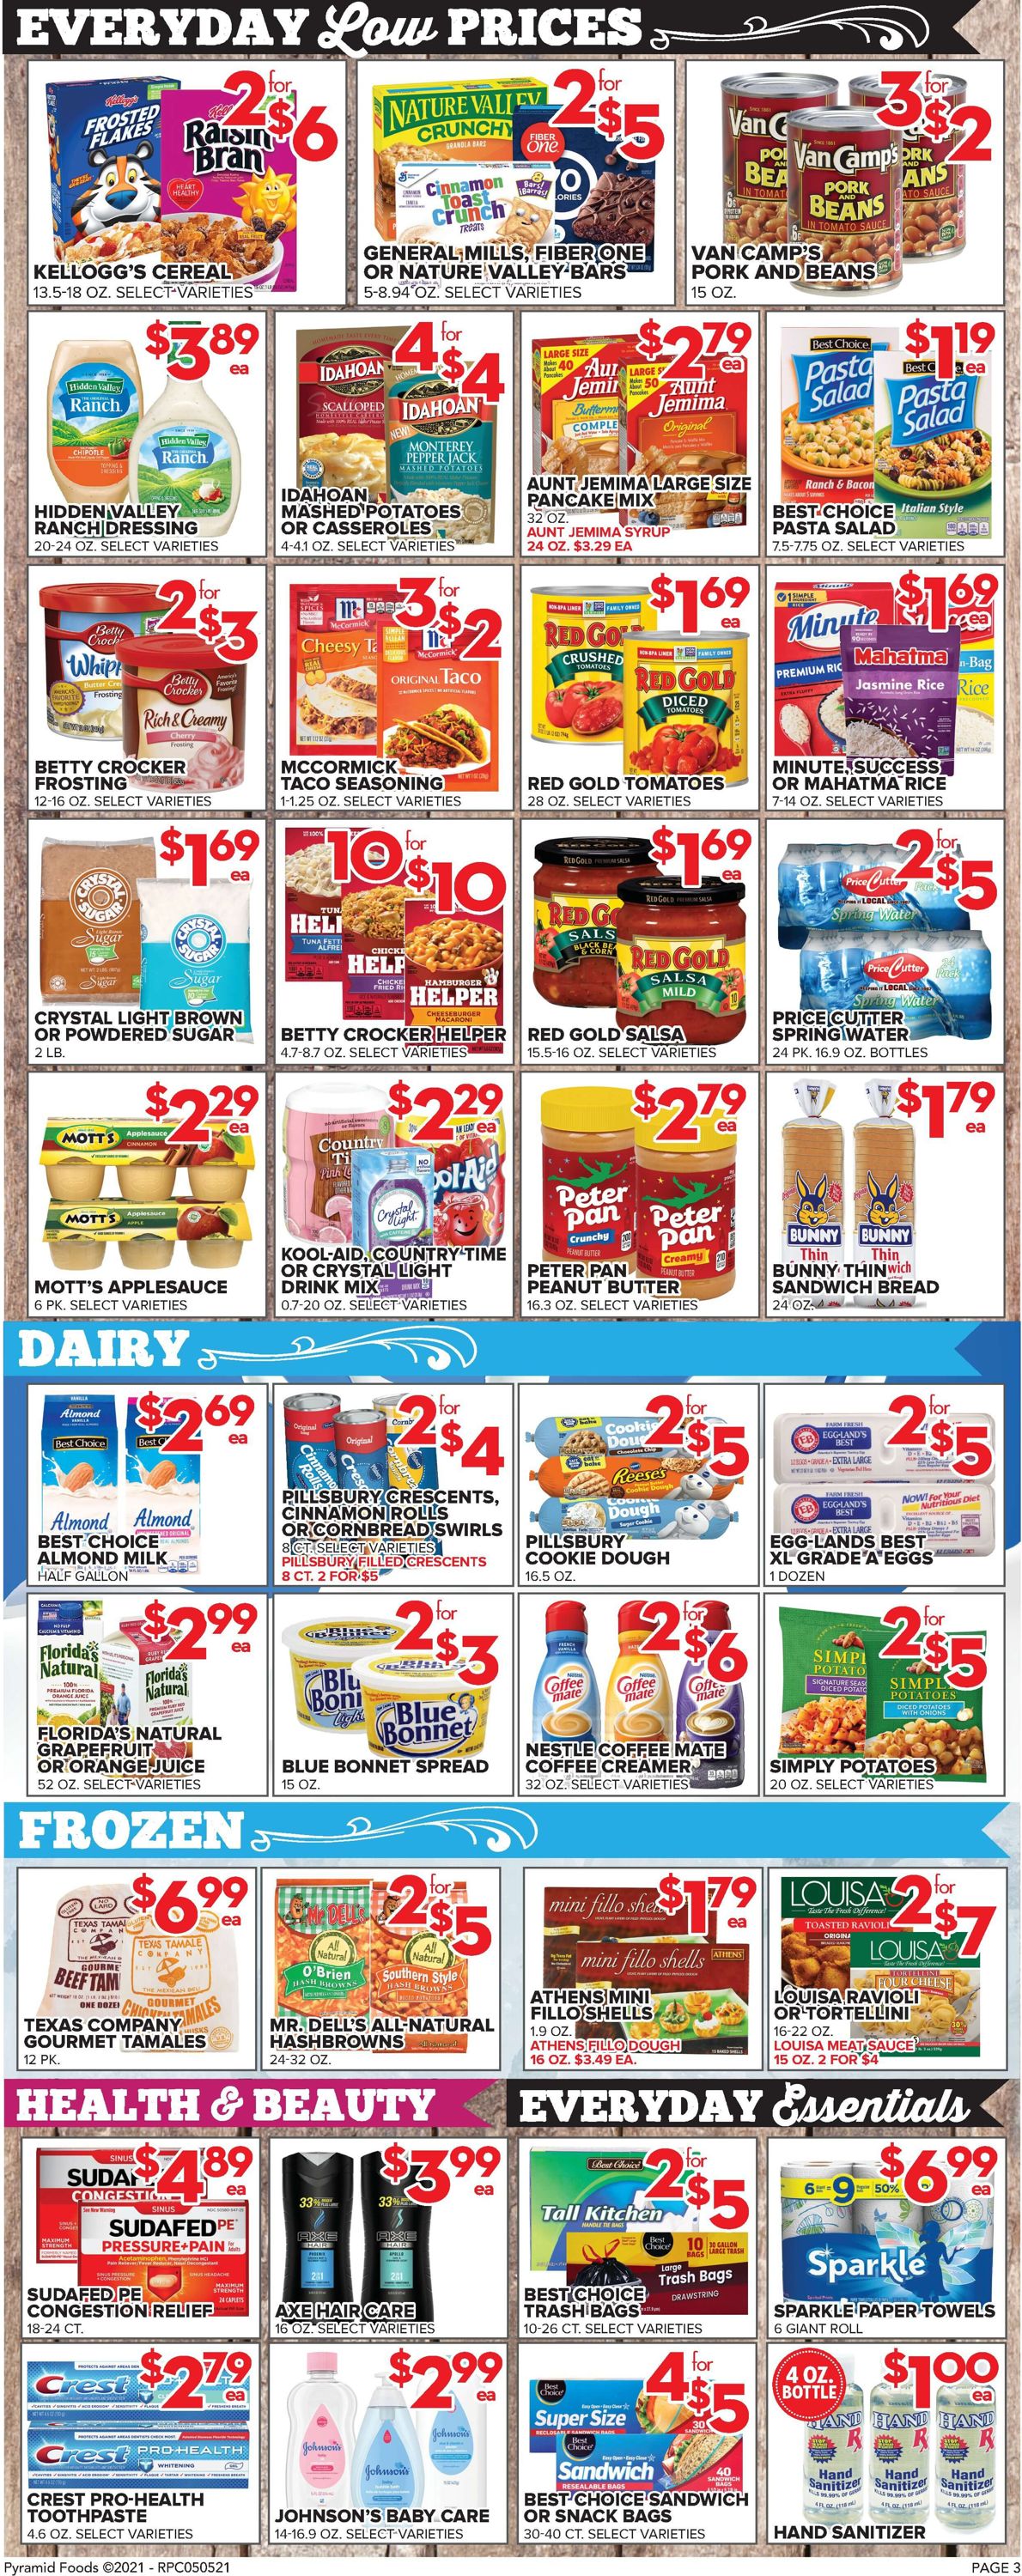 Price Cutter Weekly Ad Circular - valid 05/05-05/11/2021 (Page 3)